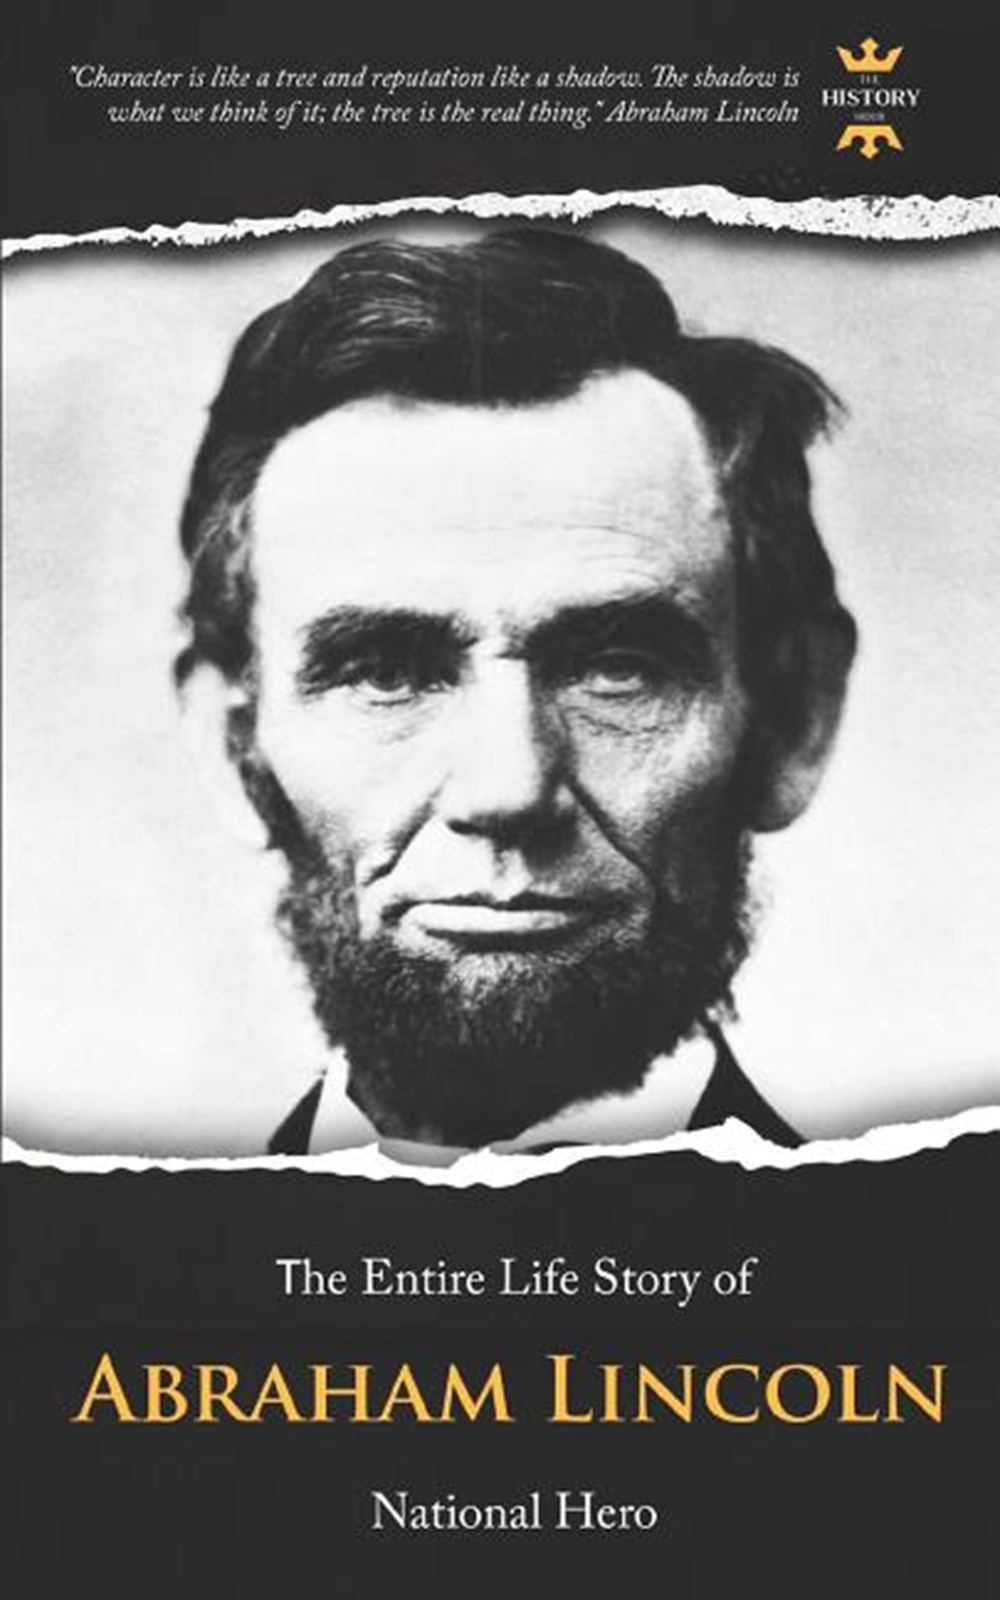 Abraham Lincoln National Hero. The Entire Life Story